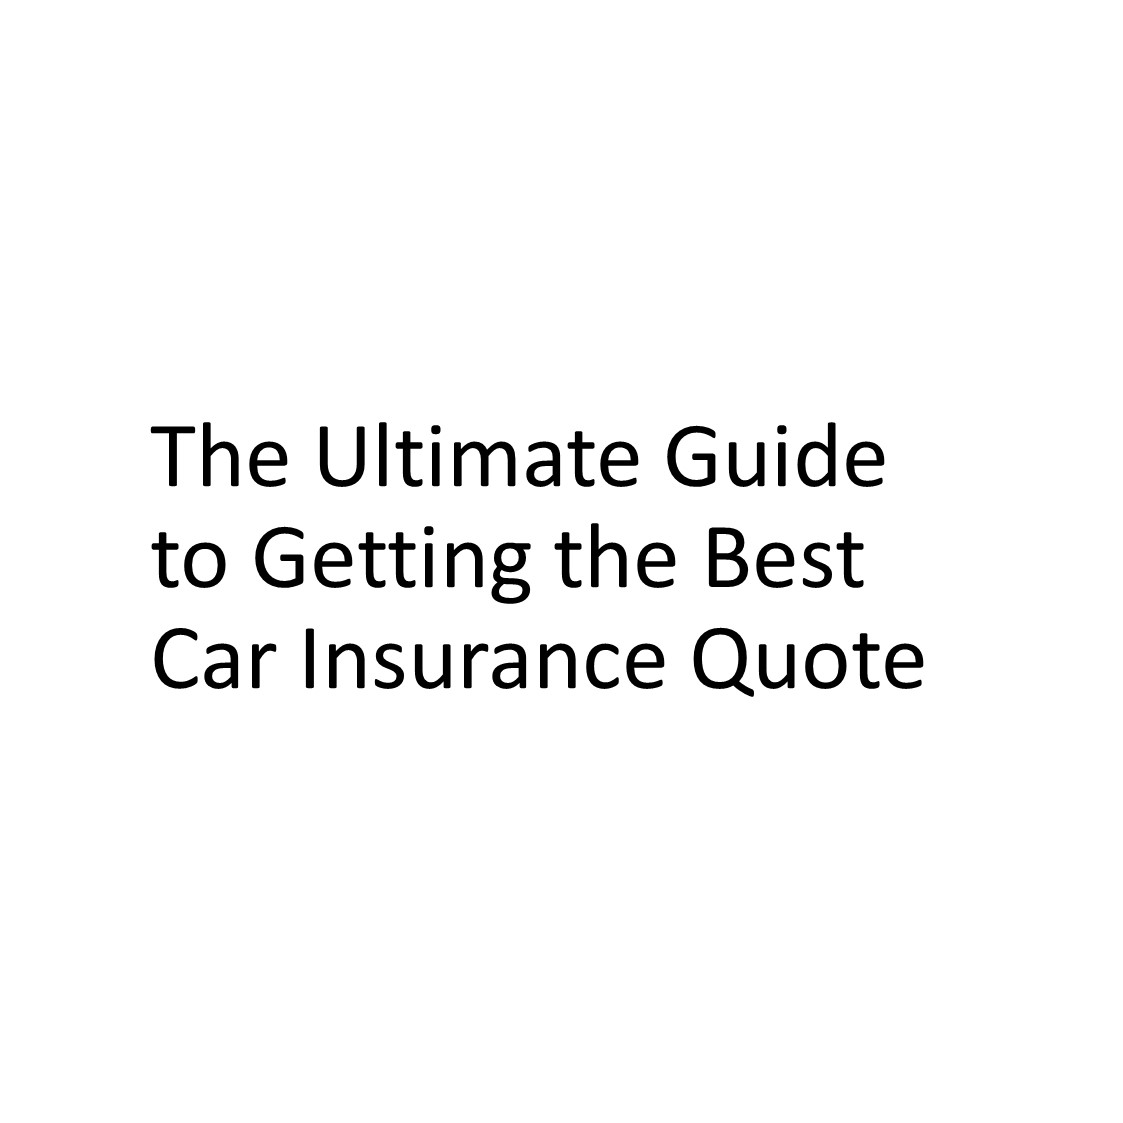 The Ultimate Guide to Getting the Best Car Insurance Quote